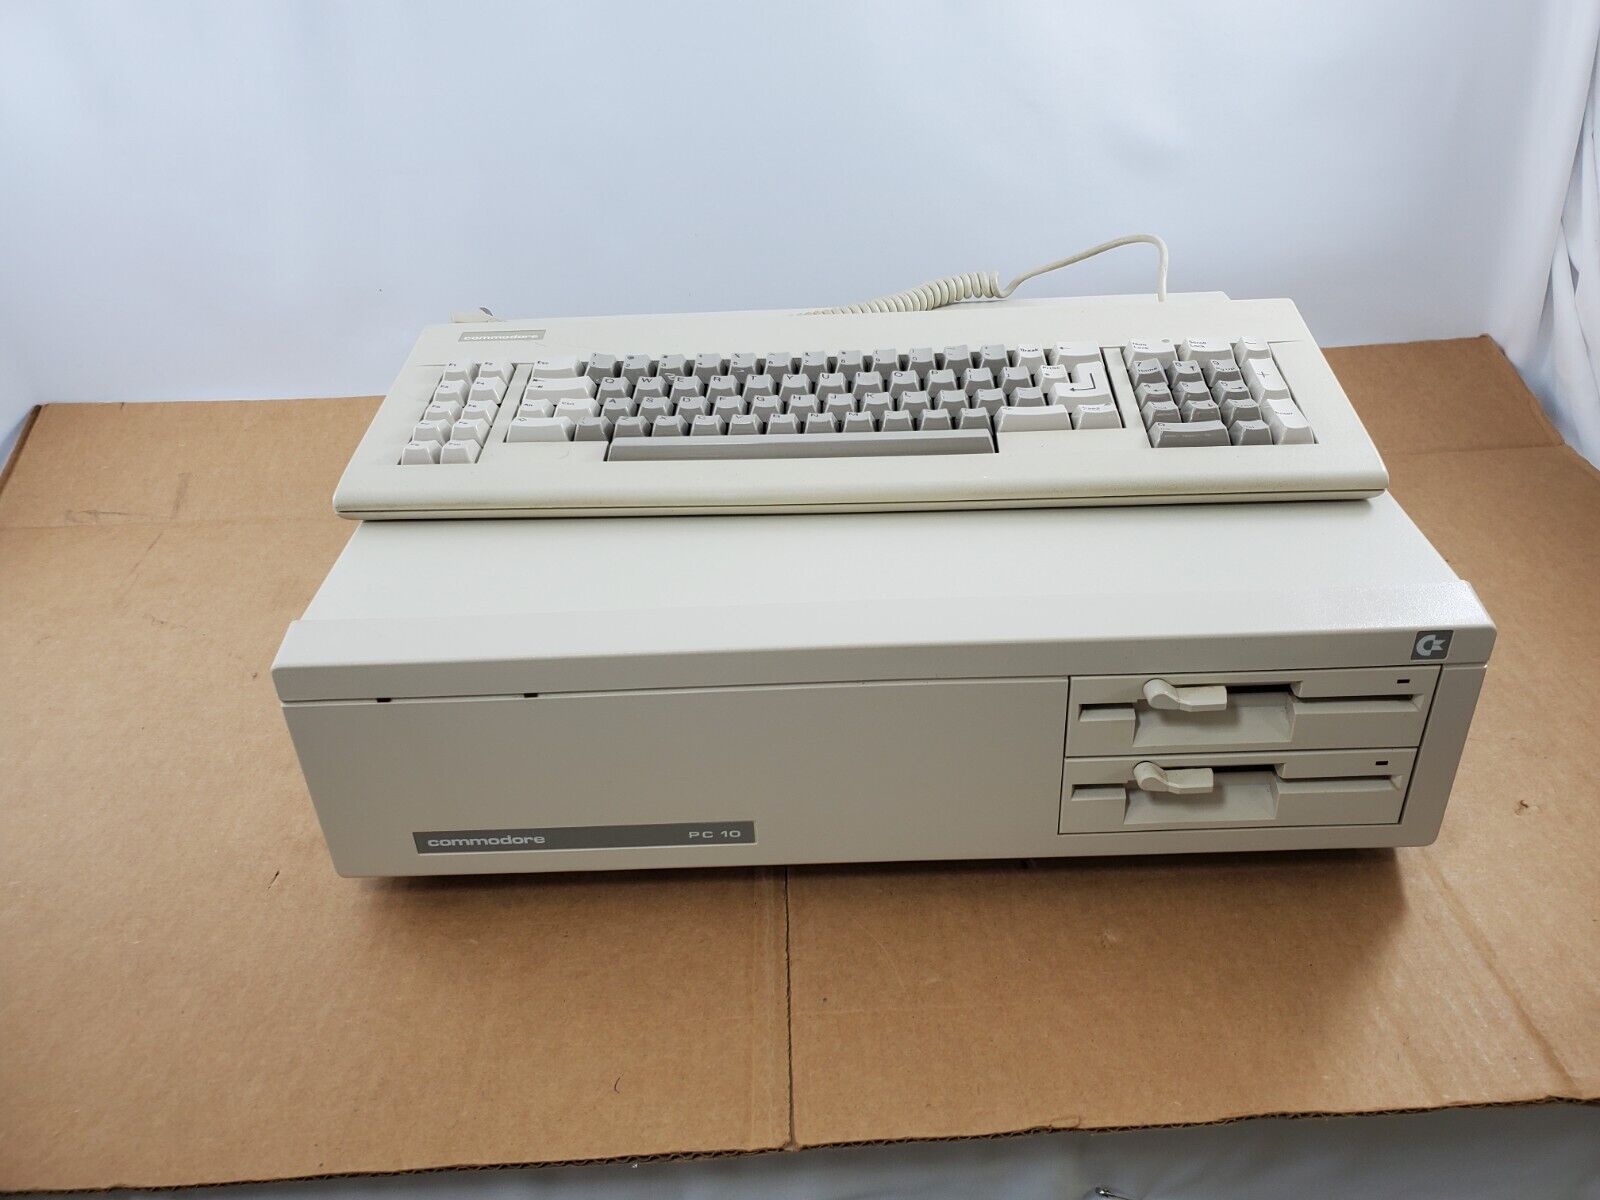 Vintage Commodore PC10 Computer and Keyboard Powers On